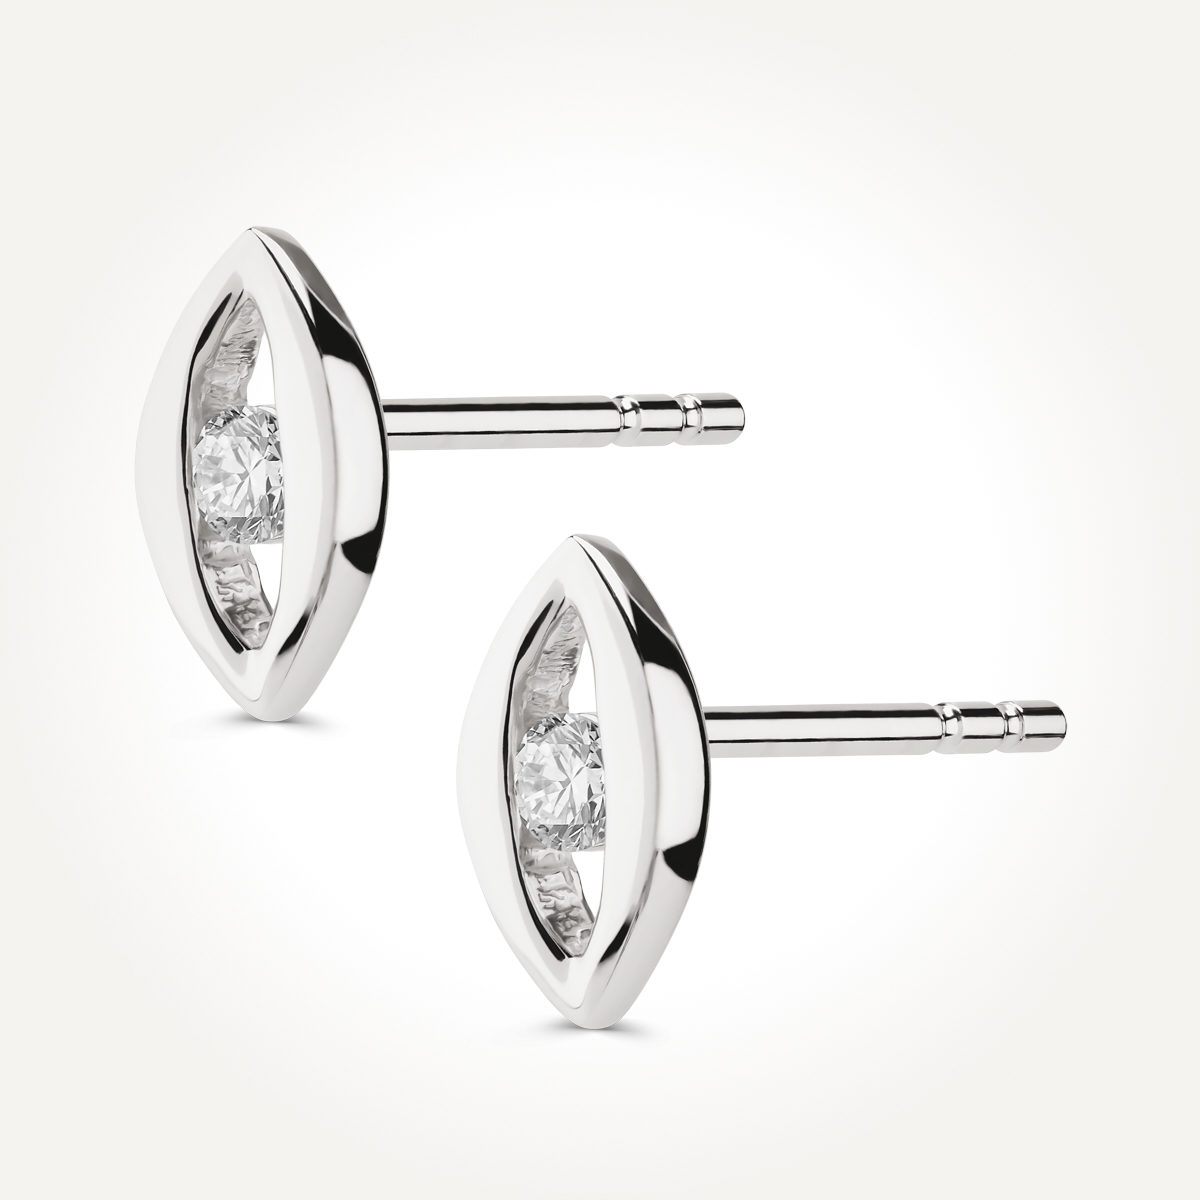 14KT White Gold Marquise Shaped Stud Earrings 0.08 CT. T.W.